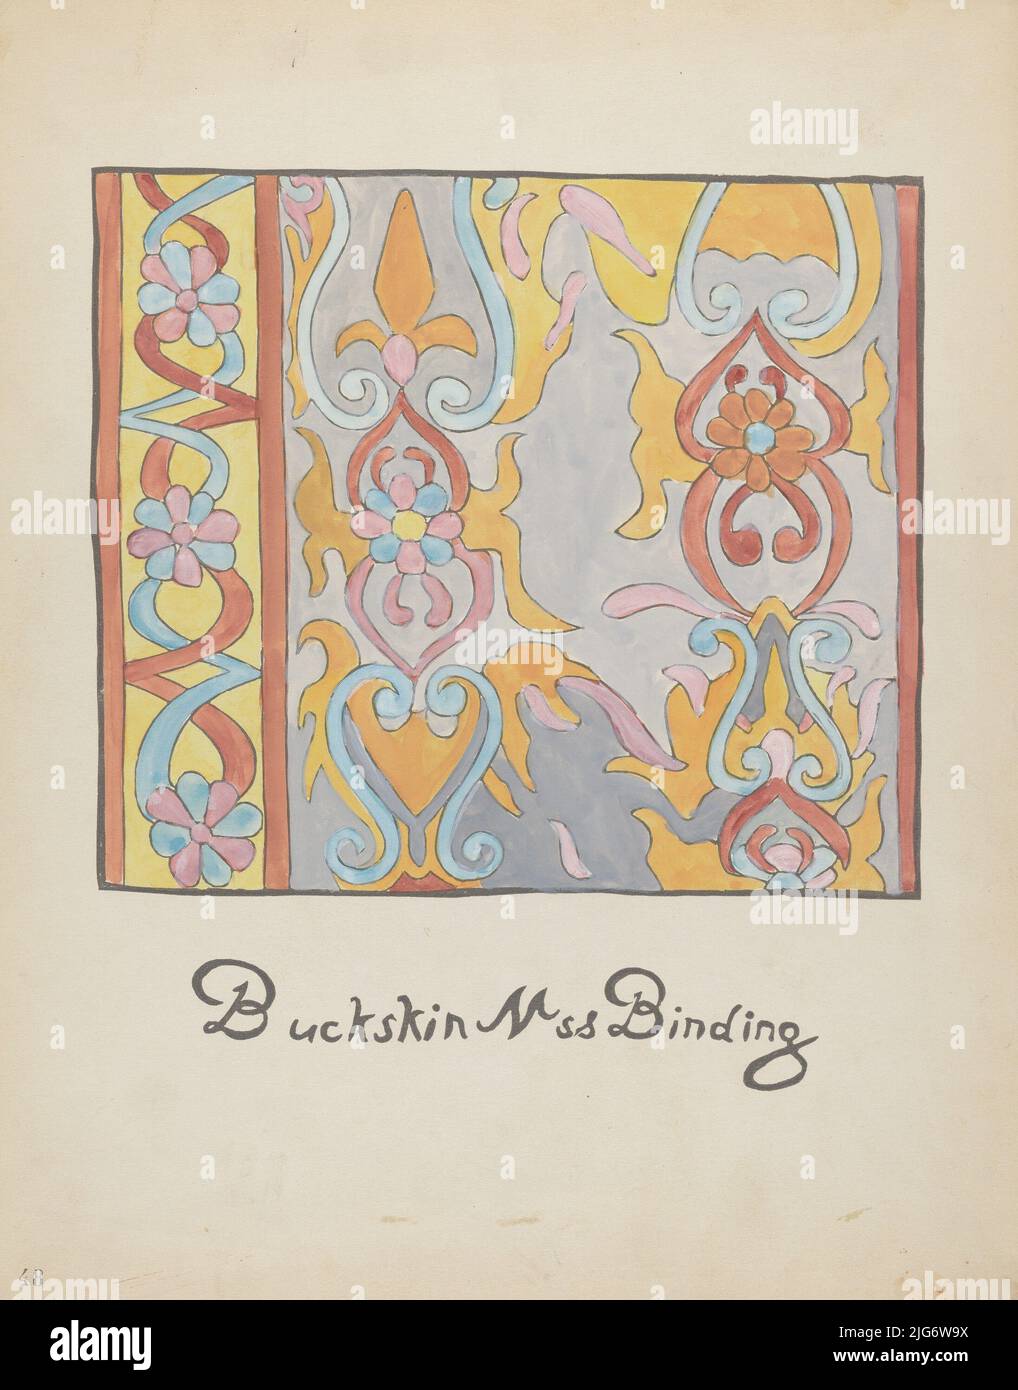 Plaque 48: Buckskin Design: From Portfolio "Spanish Colonial Designs of New Mexico", 1935/1942. Banque D'Images